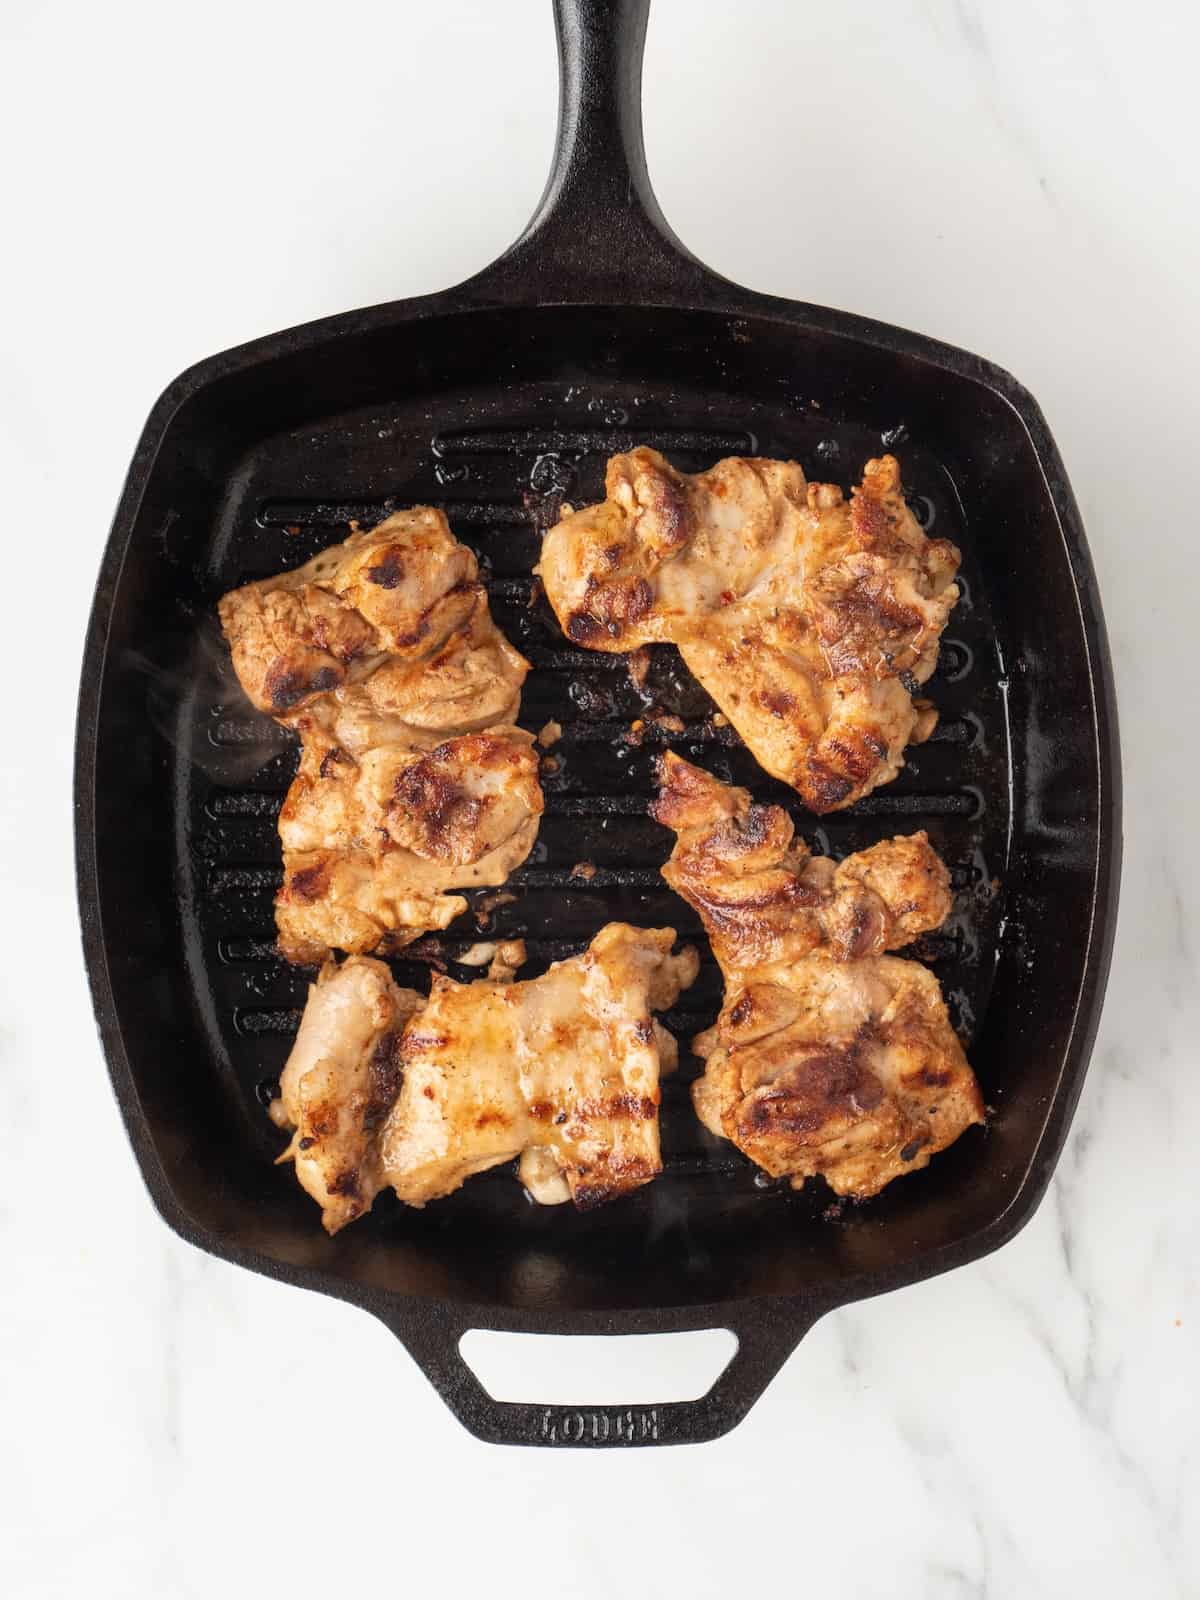 A rectangular skillet with chicken thighs being grilled.